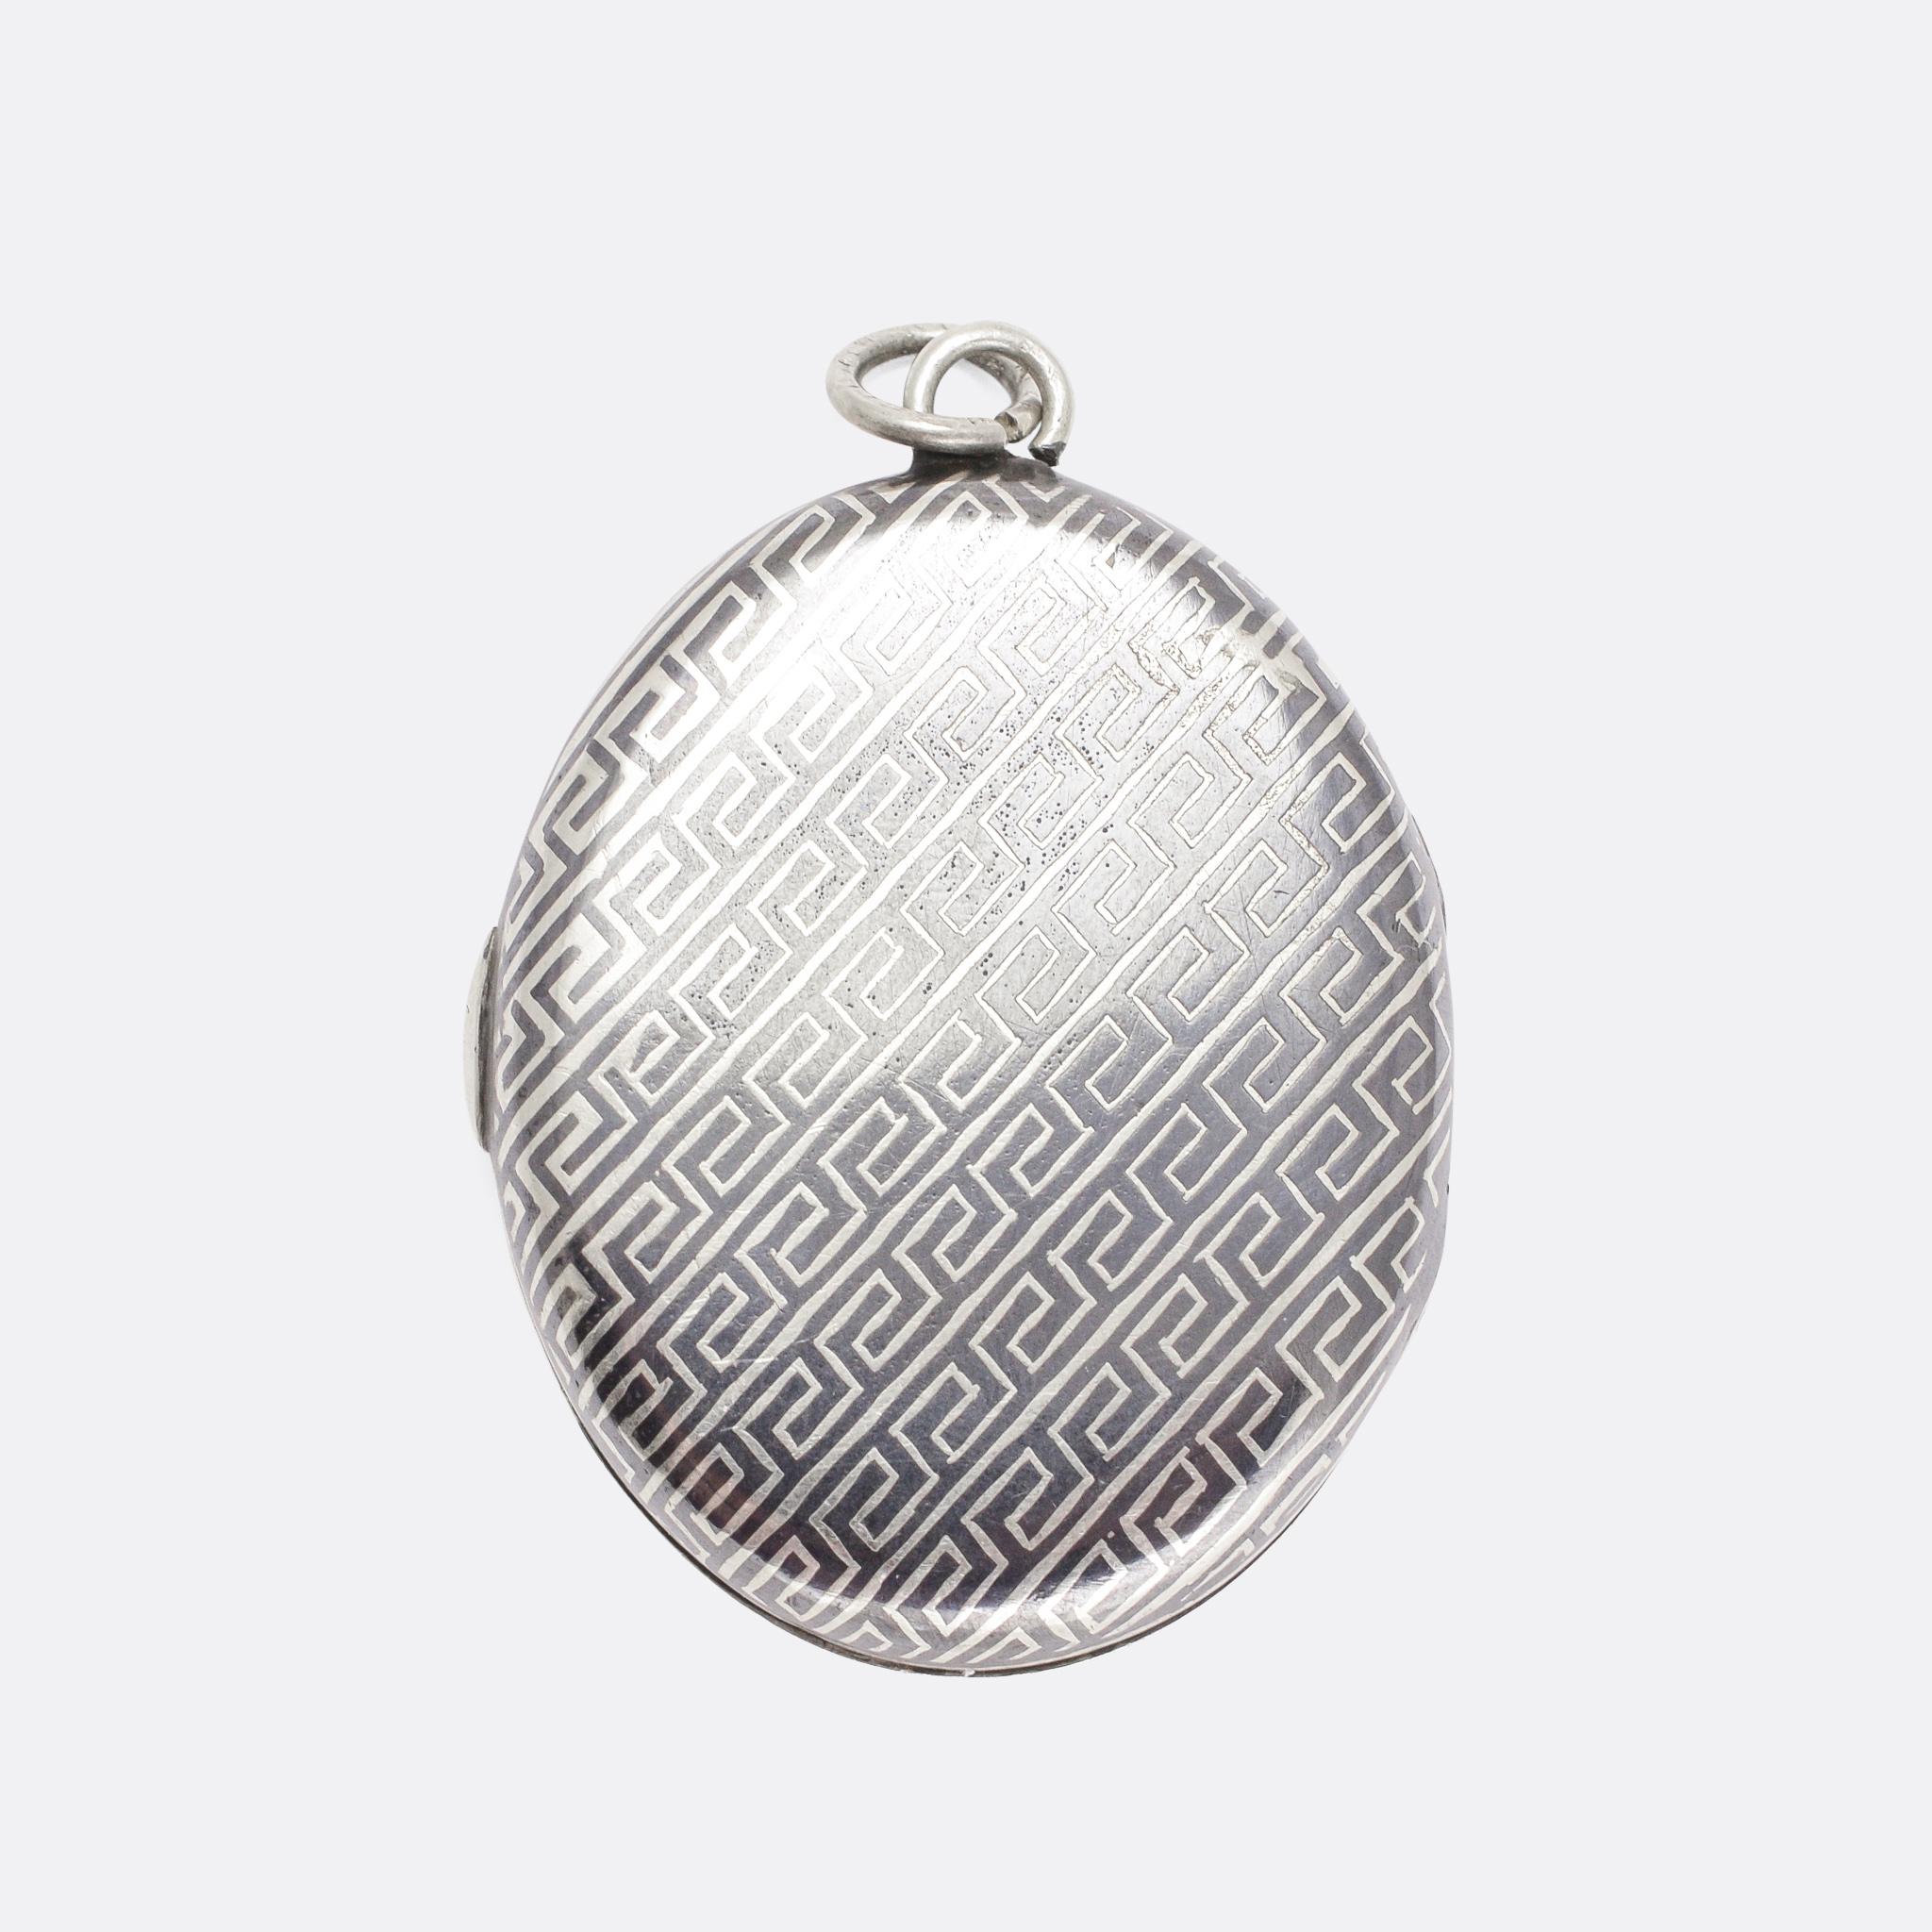 A beautiful, and quite unusual, antique oval locket. The piece is modelled in silver and finished in niello, a blue/black material comprised of copper, lead, silver, and sulphur that, like enamel, is applied to the metal and then fired. The effect